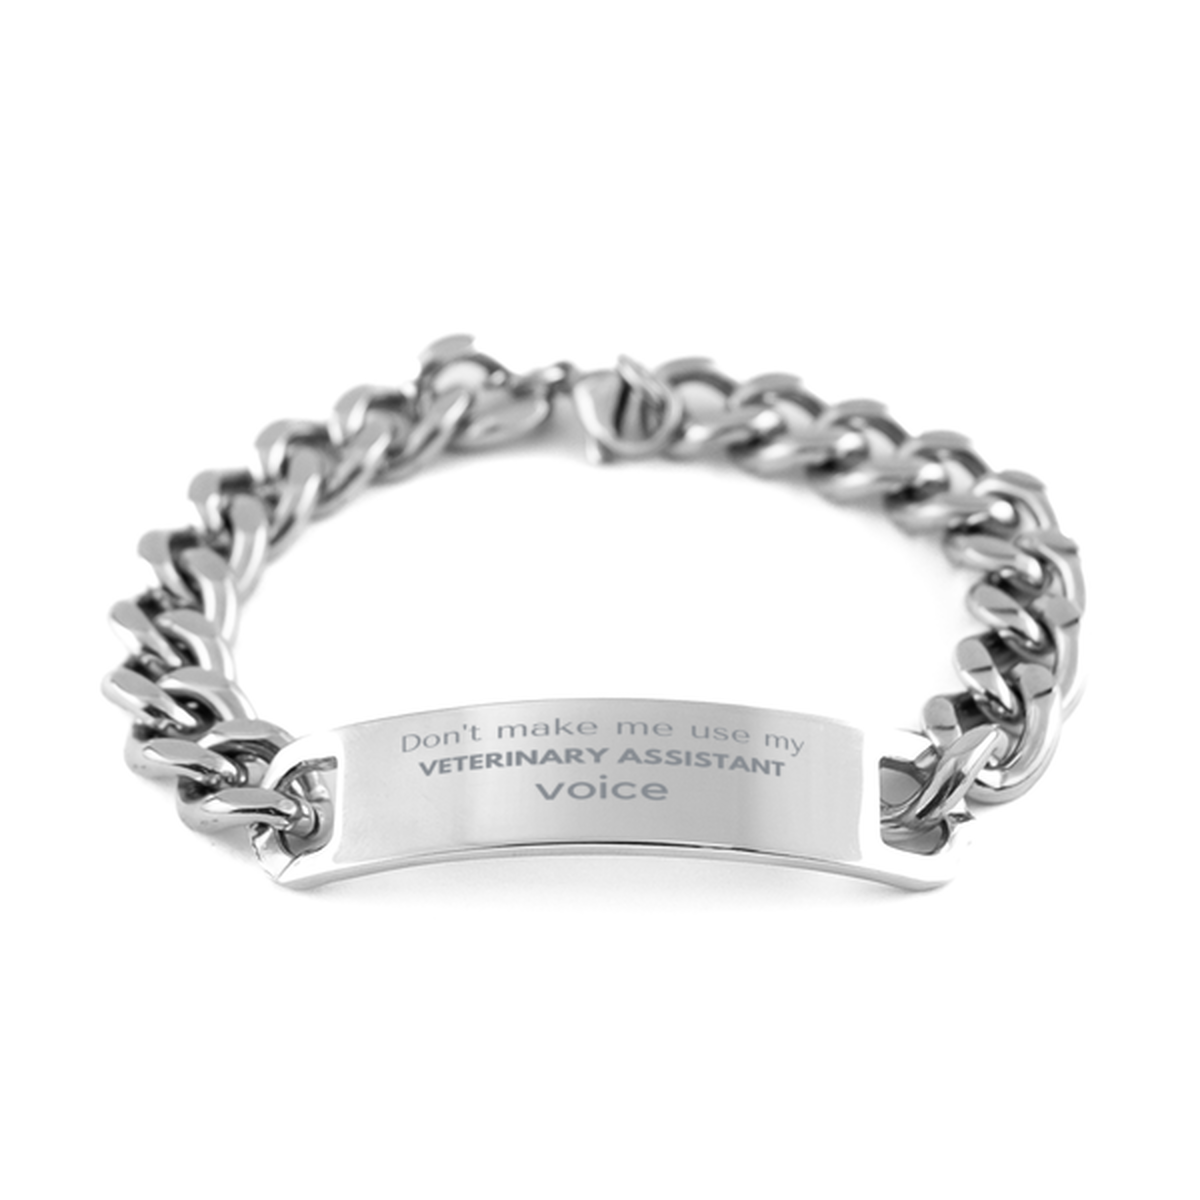 Don't make me use my Veterinary Assistant voice, Sarcasm Veterinary Assistant Gifts, Christmas Veterinary Assistant Cuban Chain Stainless Steel Bracelet Birthday Unique Gifts For Veterinary Assistant Coworkers, Men, Women, Colleague, Friends